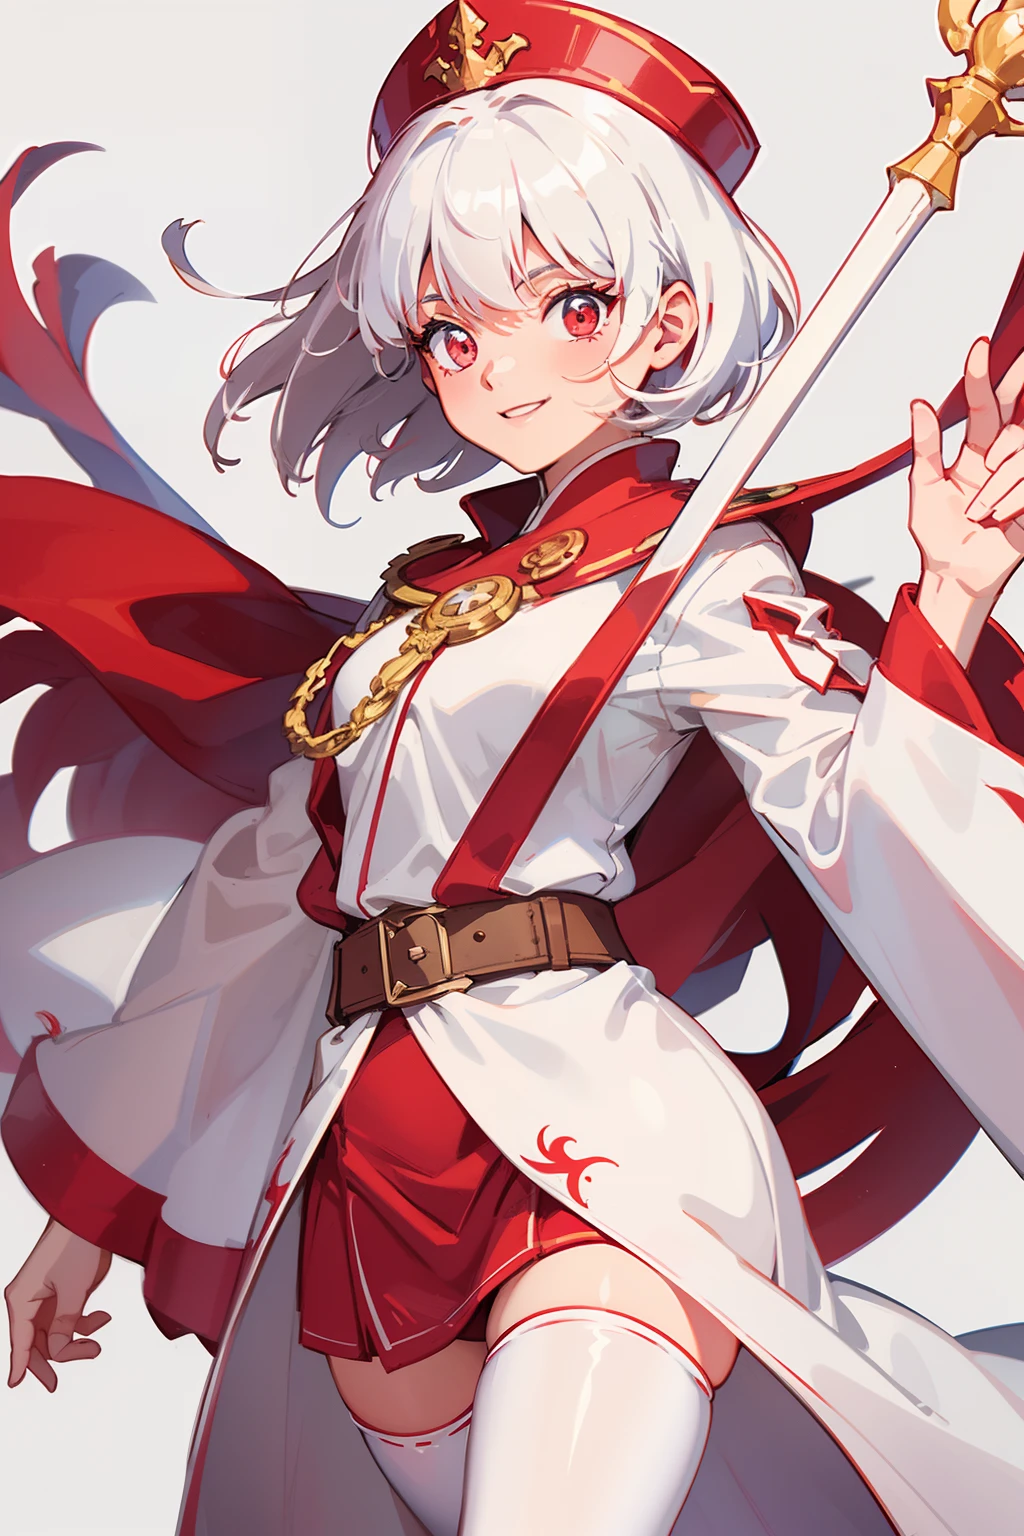 "Cleric girl with white short hair, red eyes, a cheerful smile, and a soft cap, wearing a long white robe with long sleeves and red leggins."